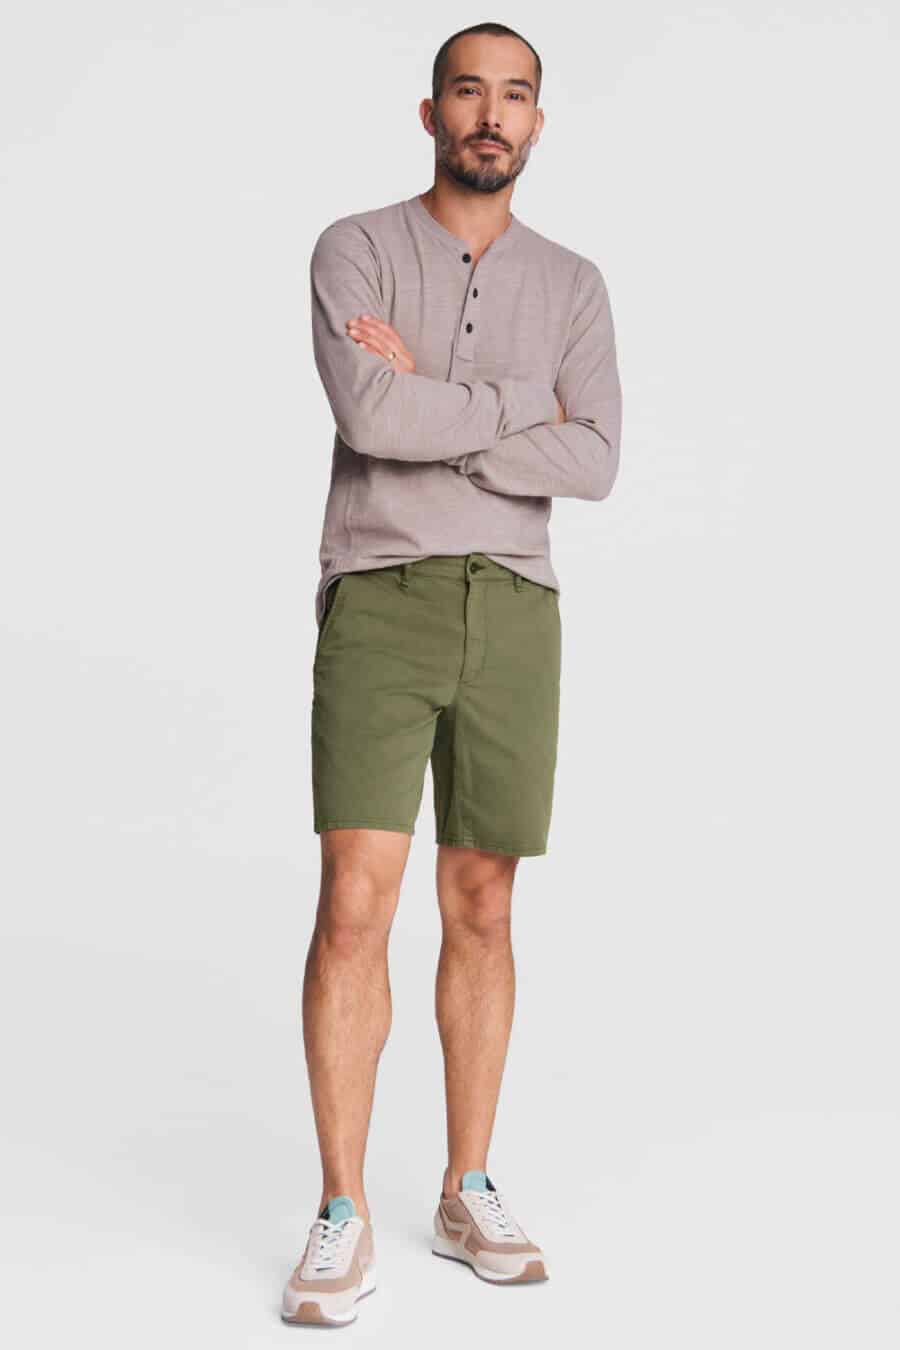 Men's shorts, henley top and canvas sneakers outfit